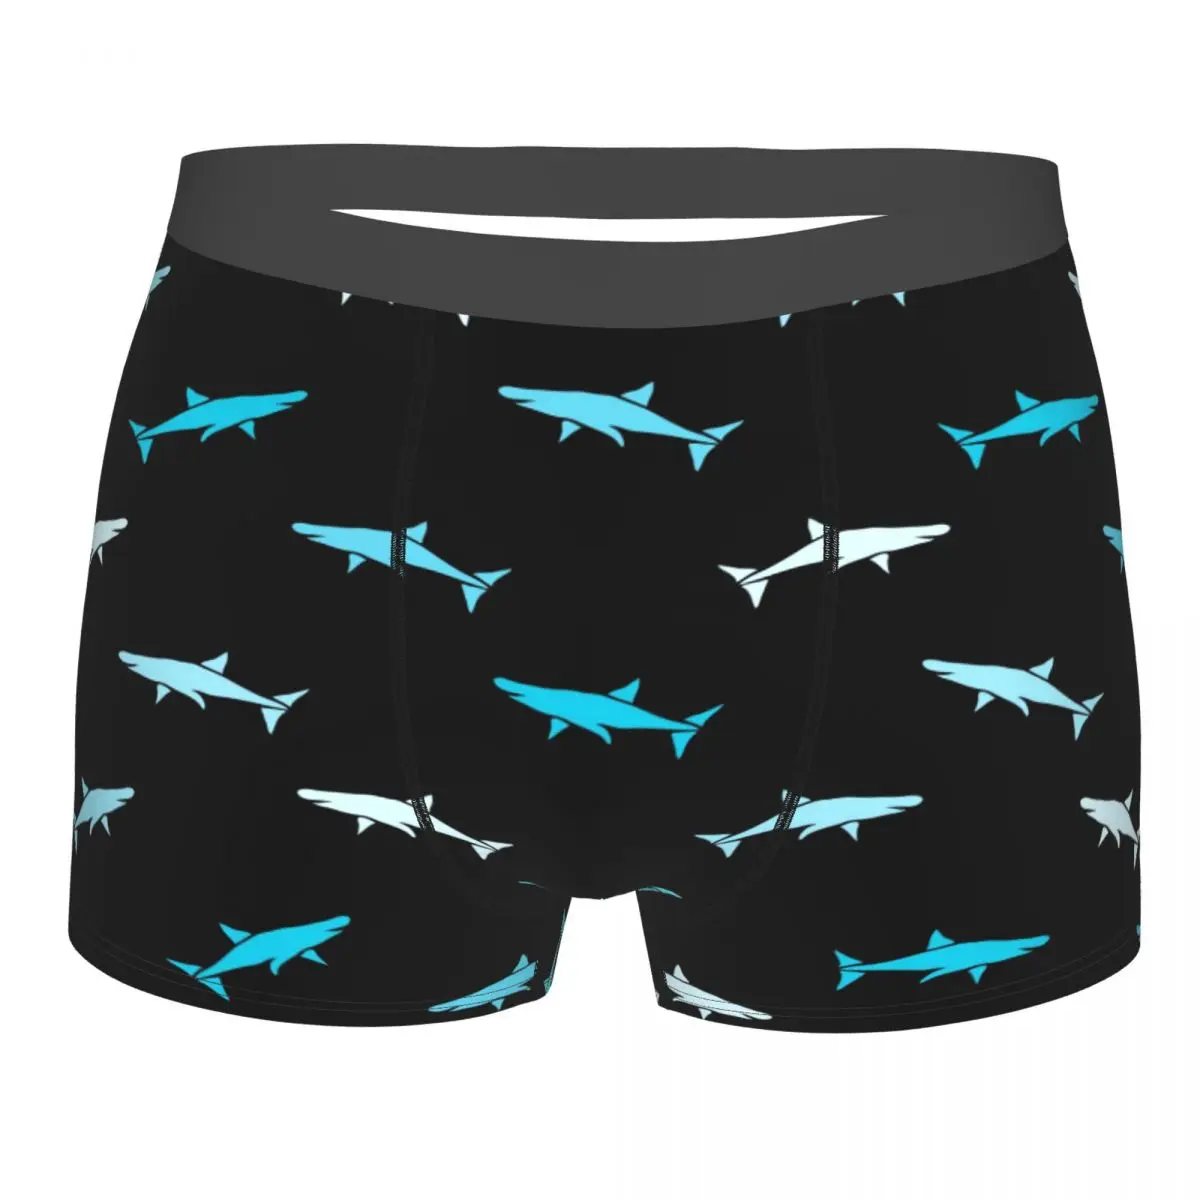 Men's Panties Underpants Boxers Underwear Abstract Sharks Sexy Male Shorts